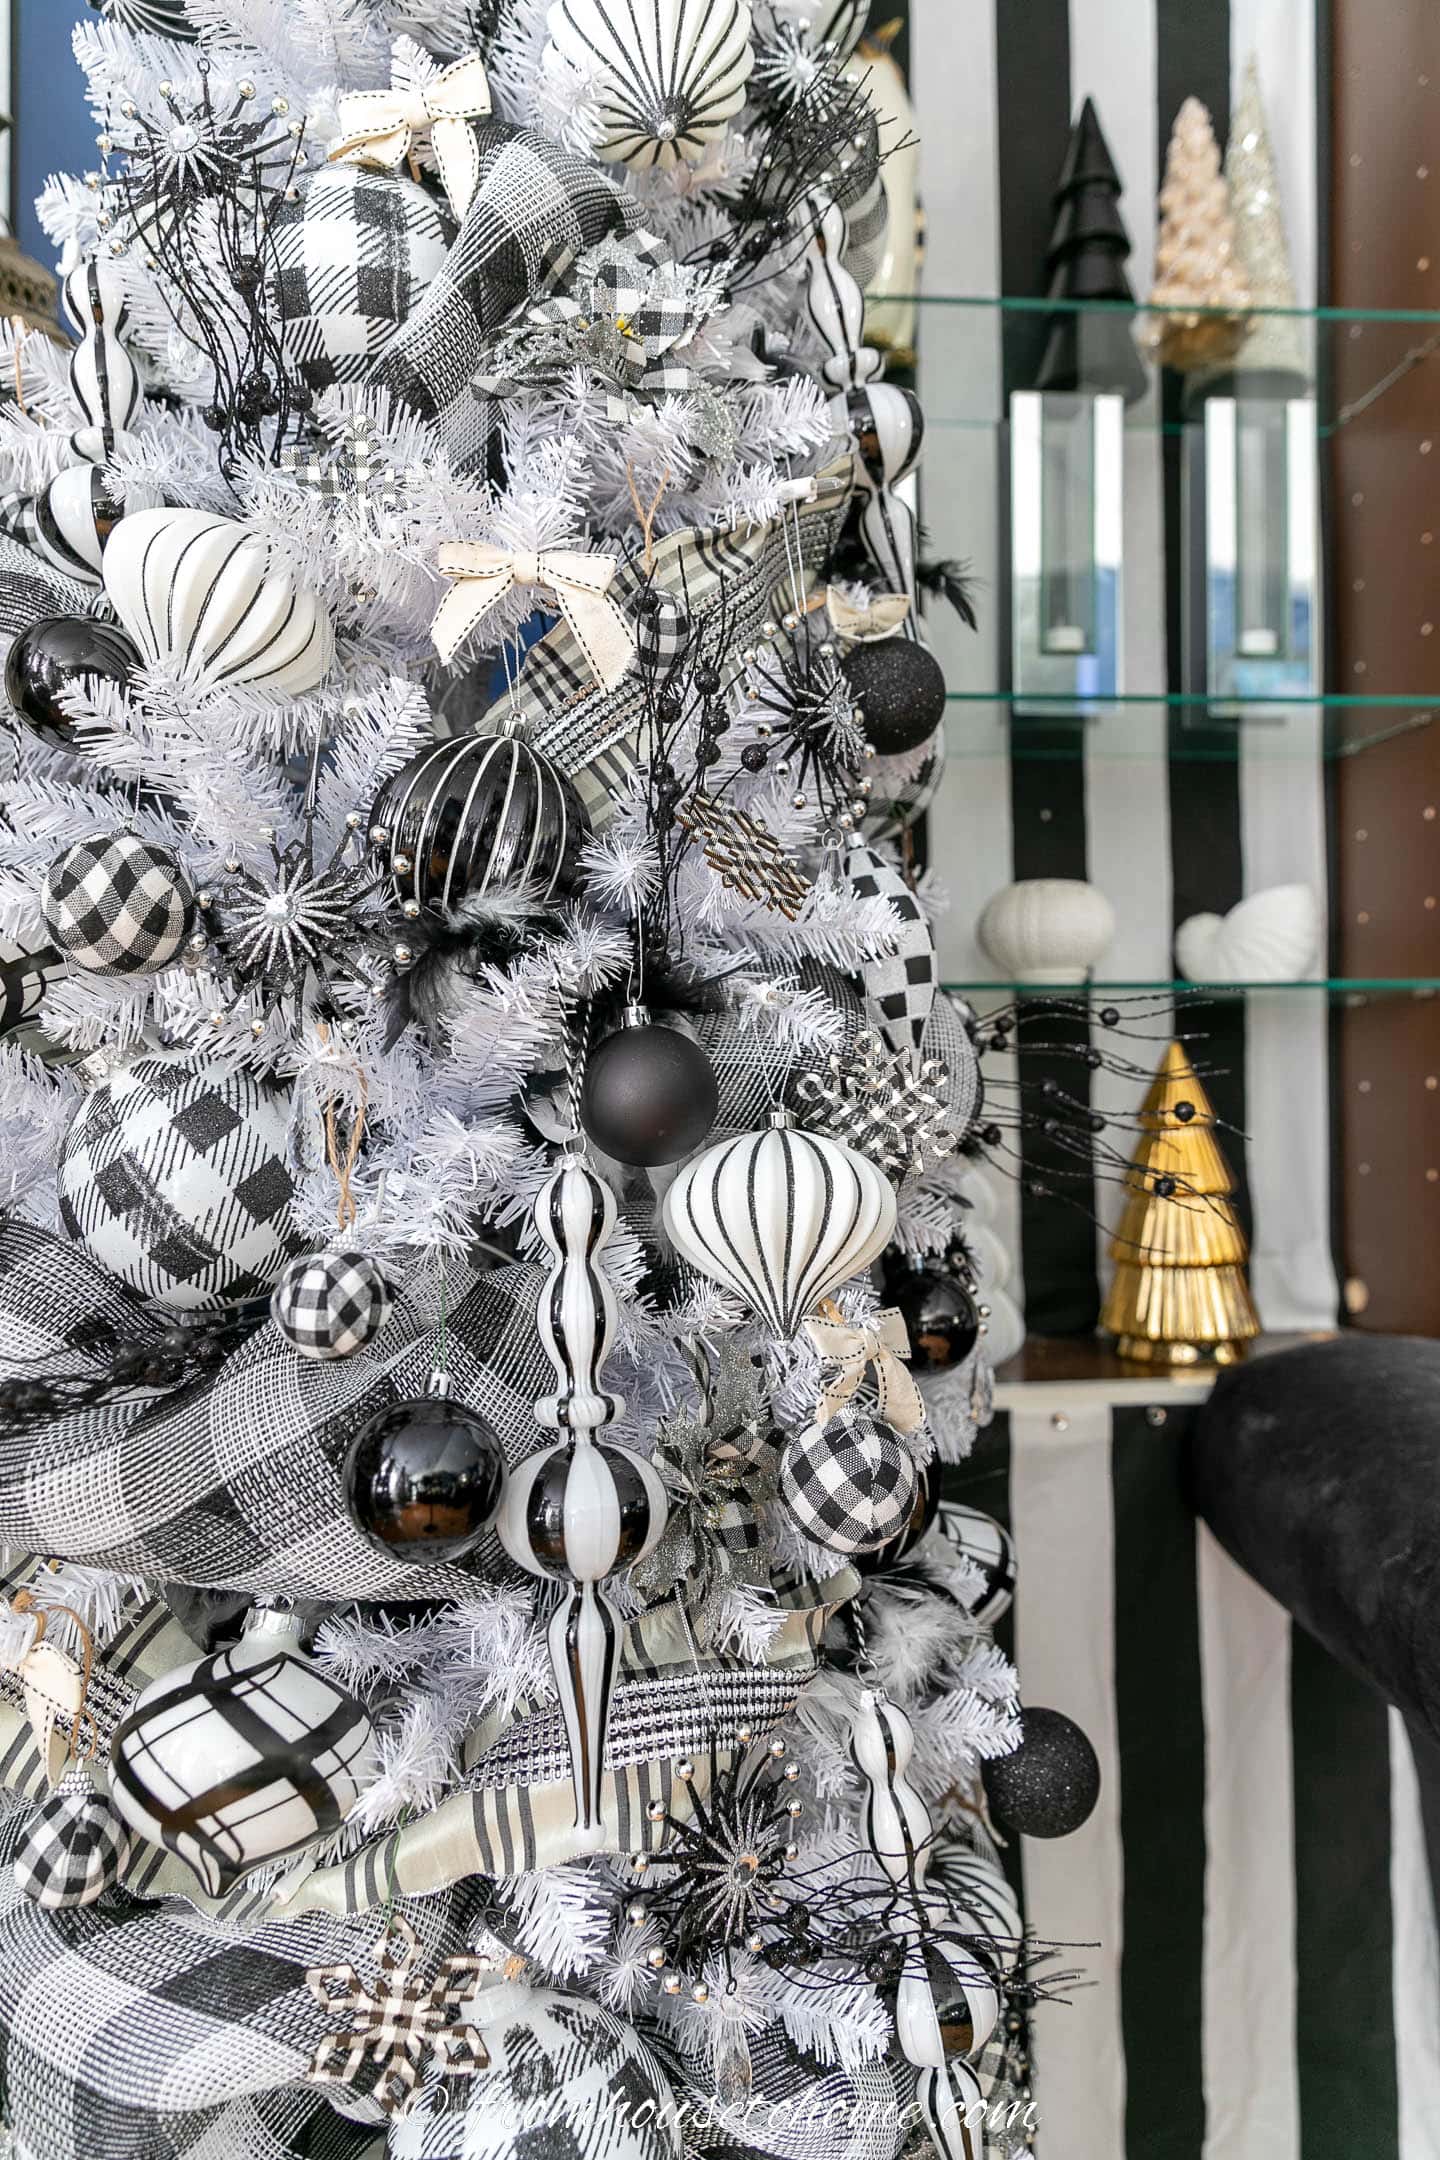 Close up of a black and white plaid Christmas tree in front of shelves with black and white stripes